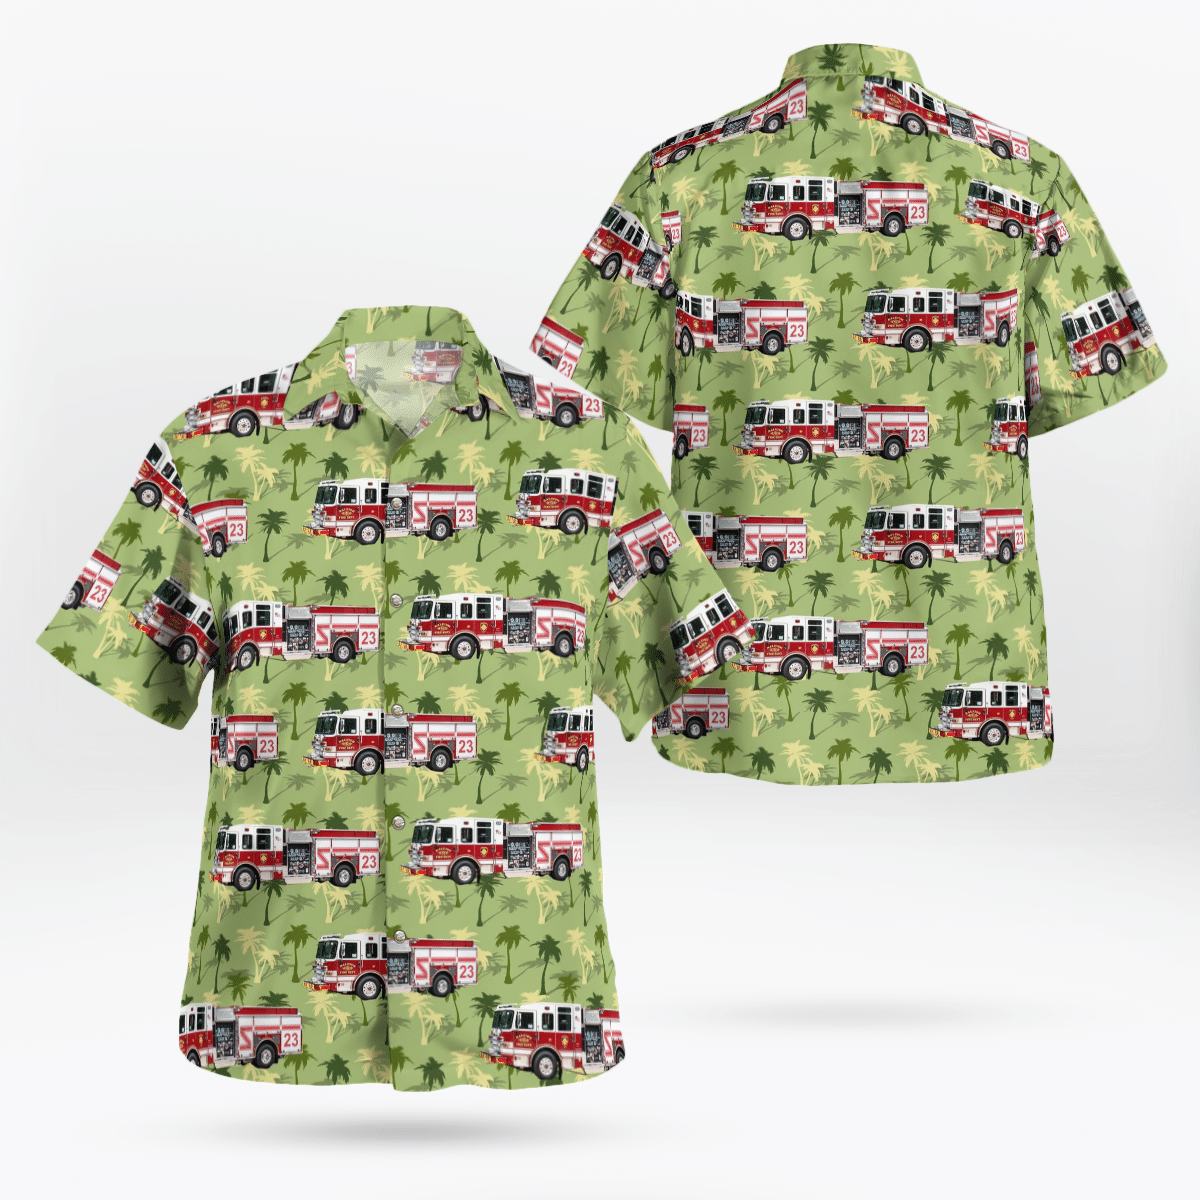 Consider getting these Hawaiian Shirt for your friends 207